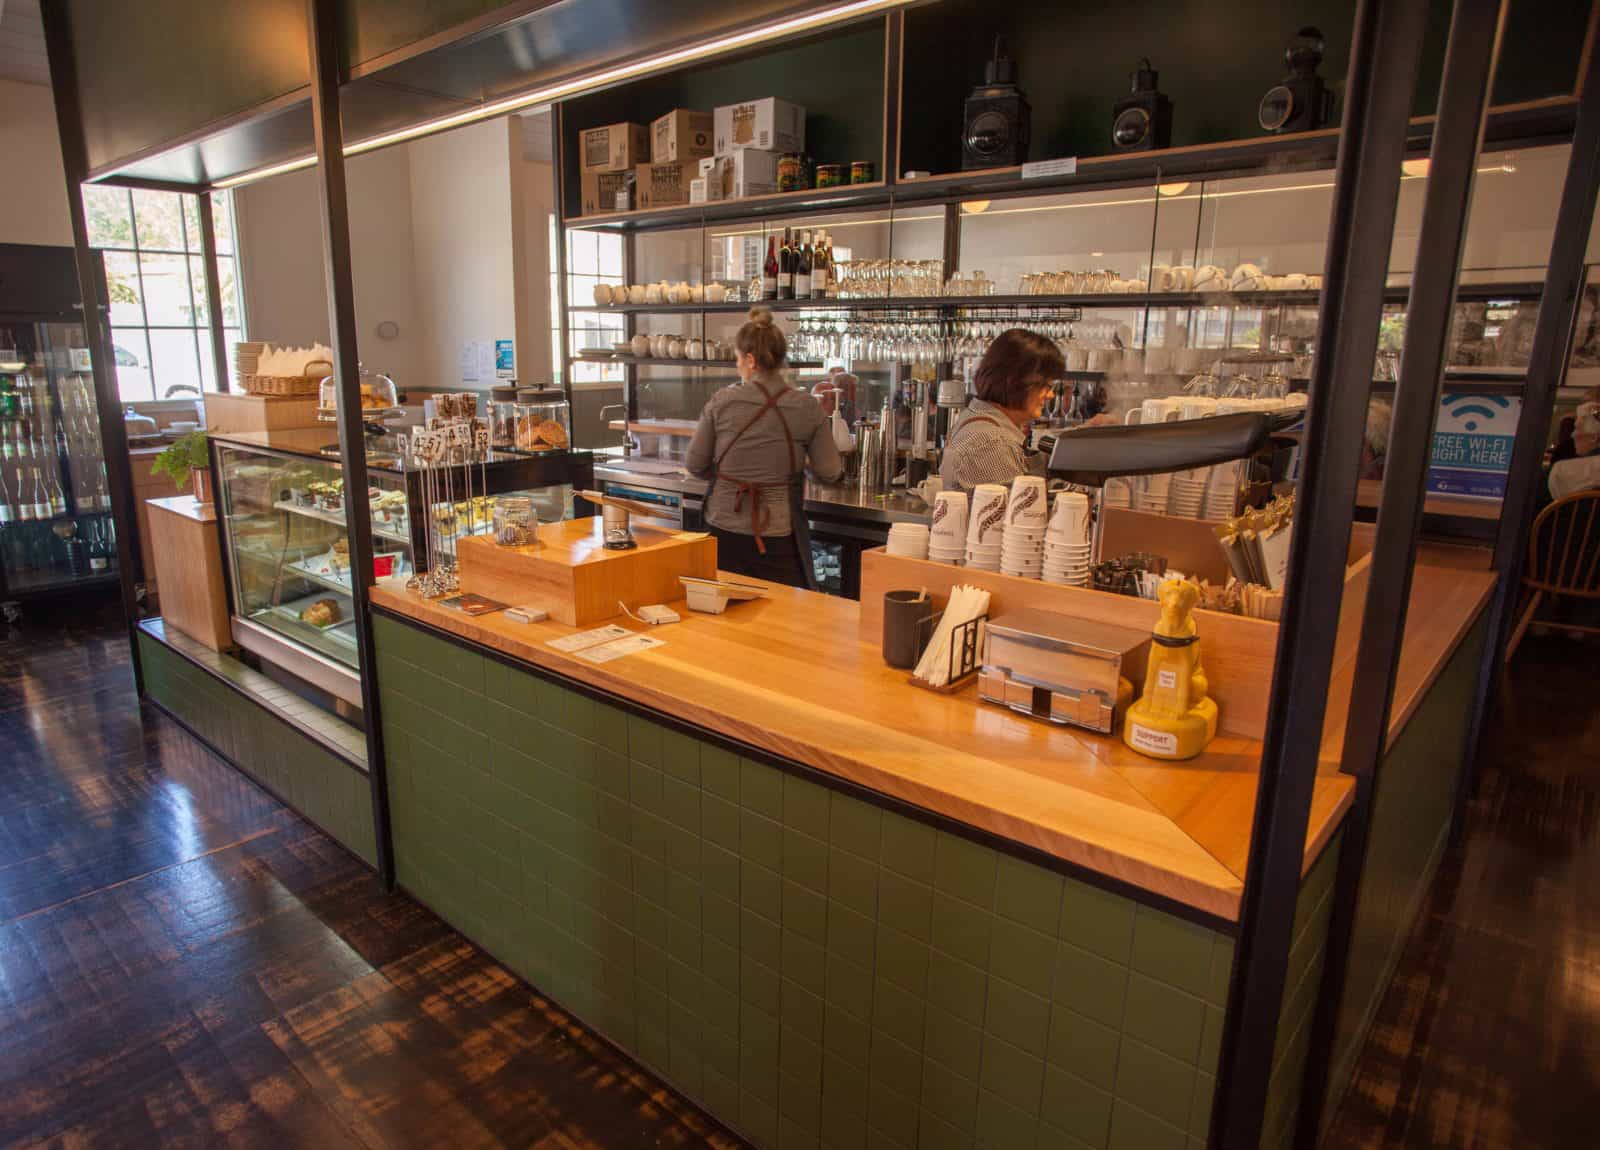 Tracks Cafe at Queenstown Station offers a large, bright, warm and welcoming atmosphere